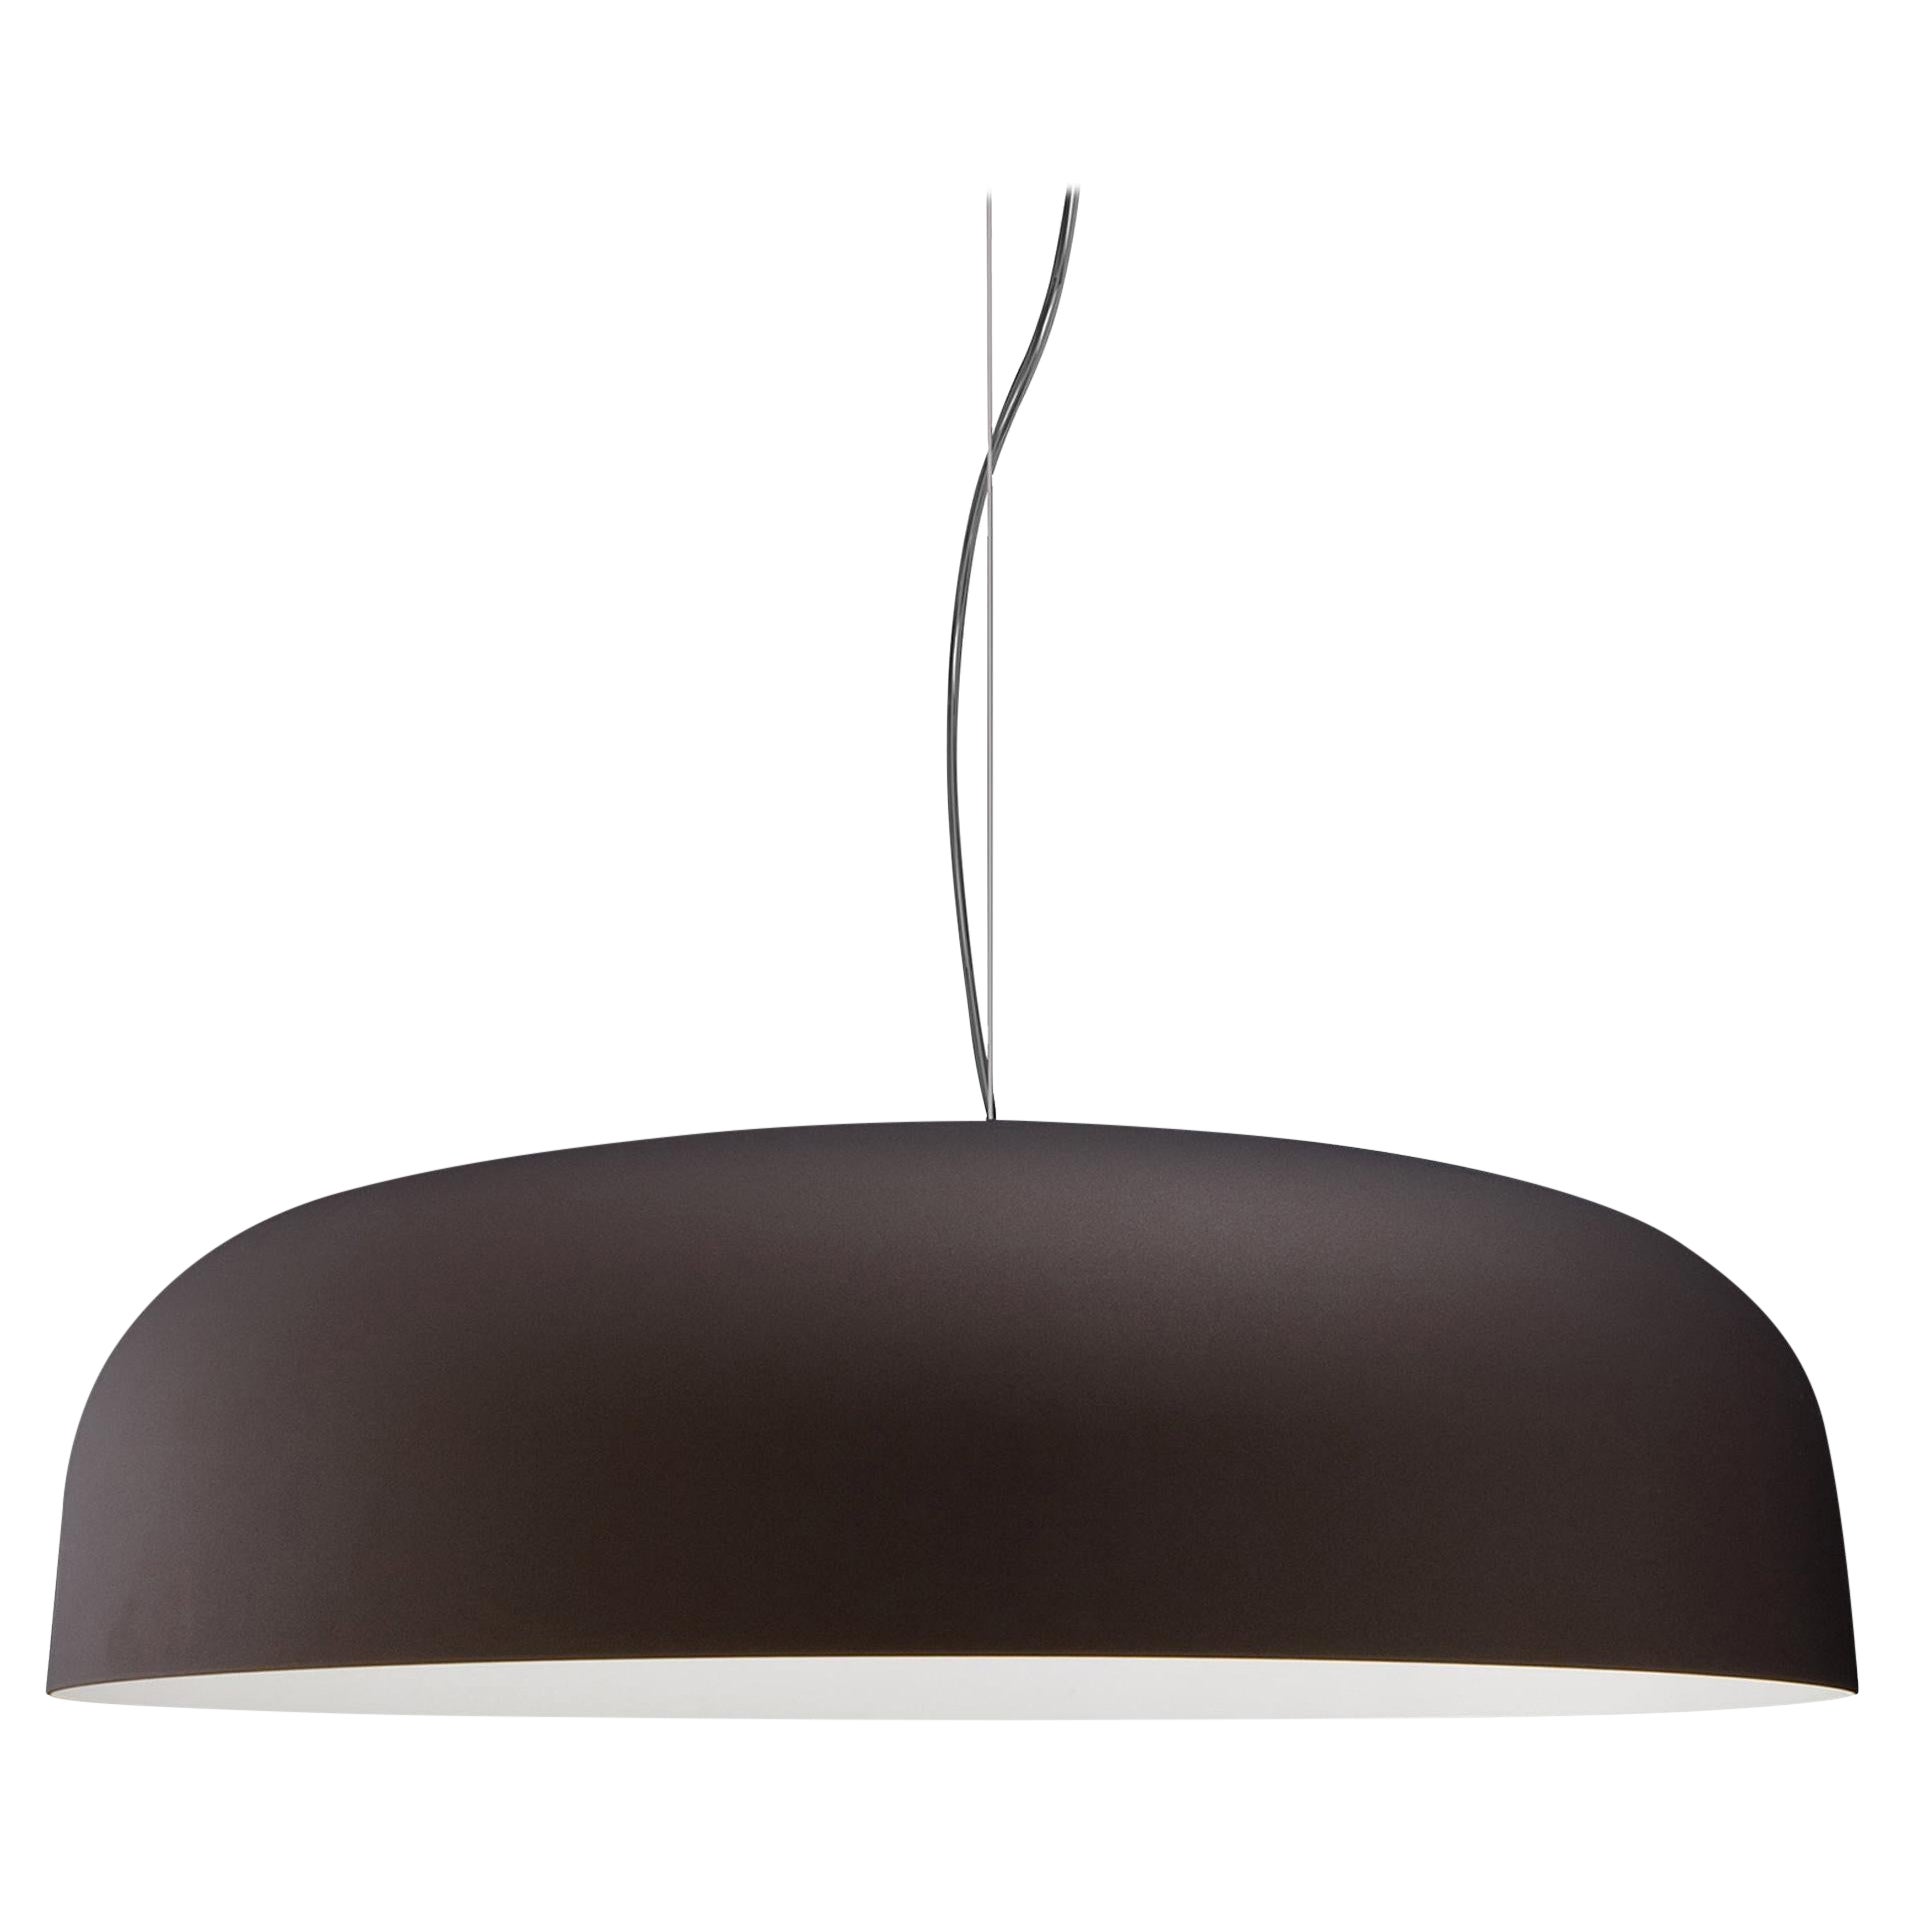 Francesco Rota Suspension Lamp 'Canopy' 422 Bronze and White by Oluce For Sale